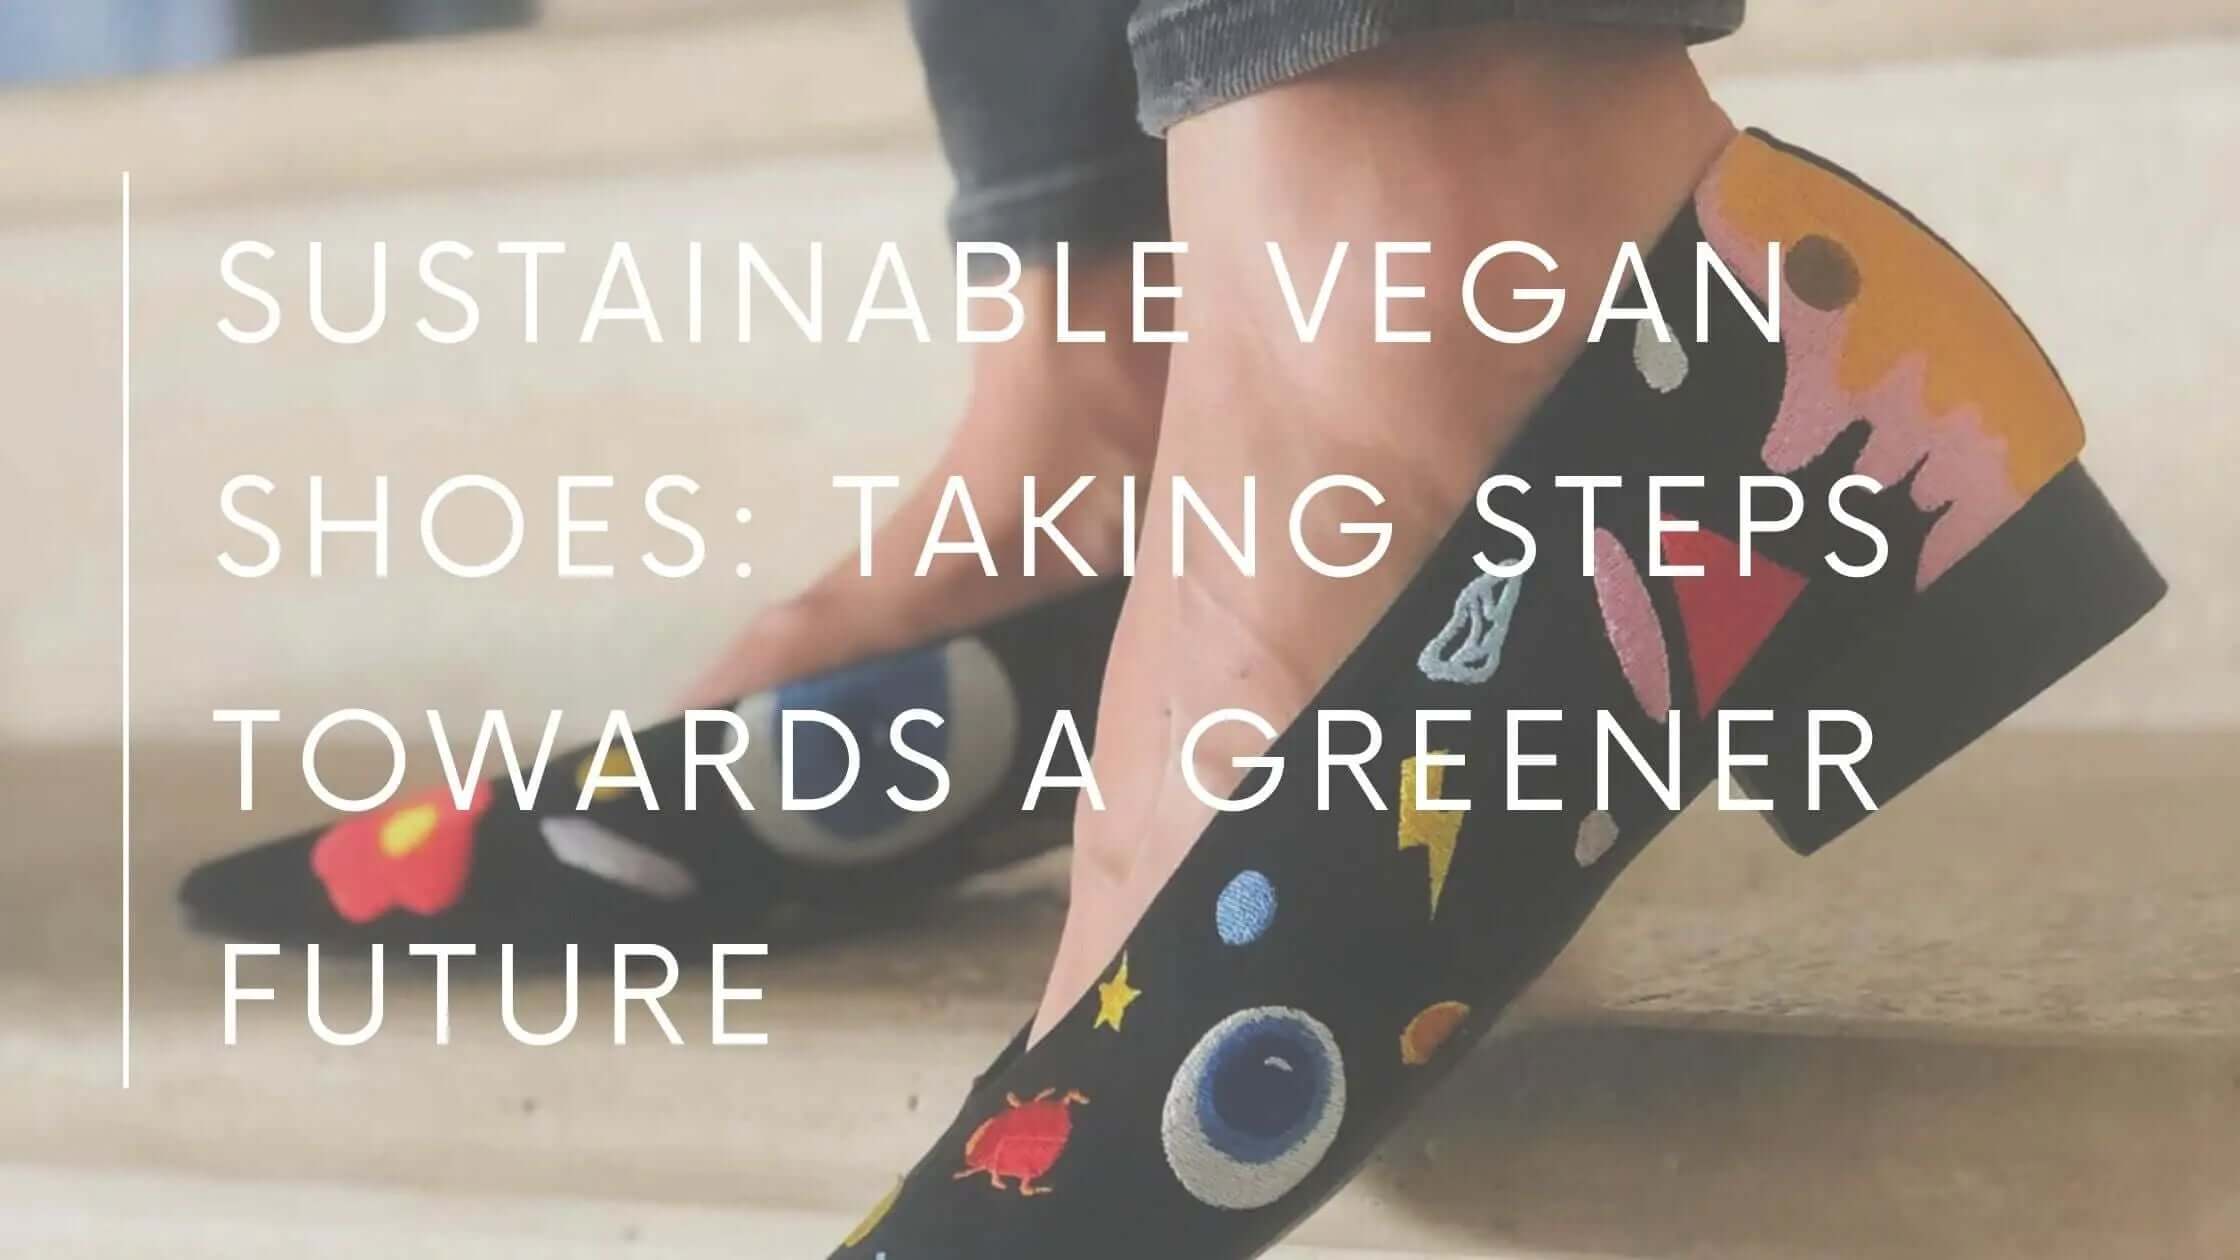 An image of a pair of sustainable vegan shoes made from recycled materials, representing eco-friendly and cruelty-free footwear.